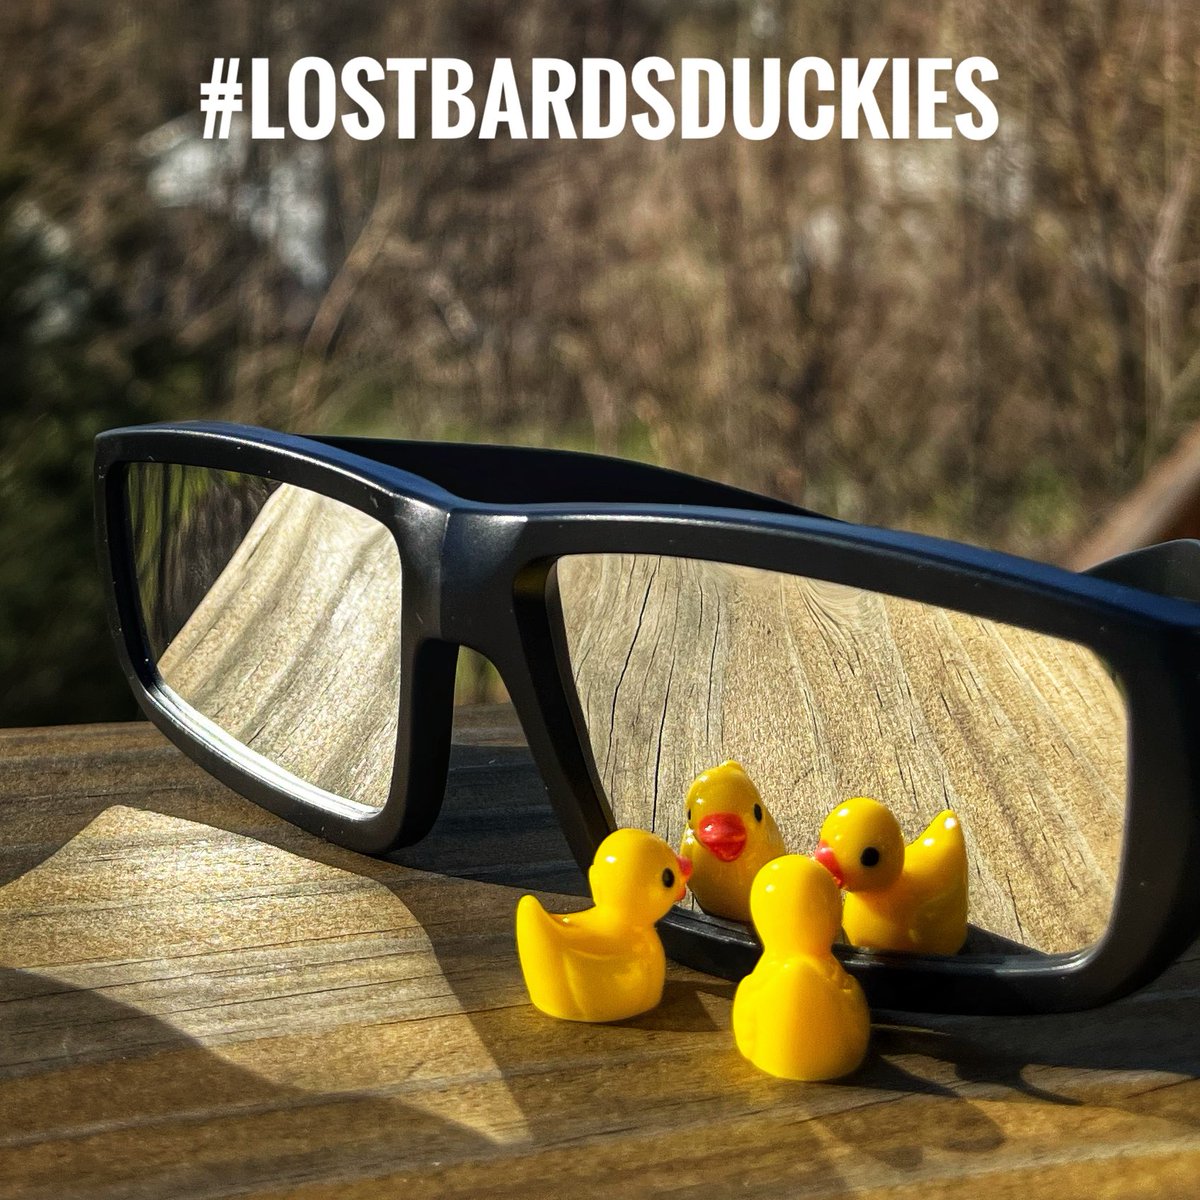 The Duckies are ready for the eclipse!

Travelogue of The Lost Bard’s Duckies. 

#traveltheworld #duckoftheday #neverstopexploring #lostbardsduckies